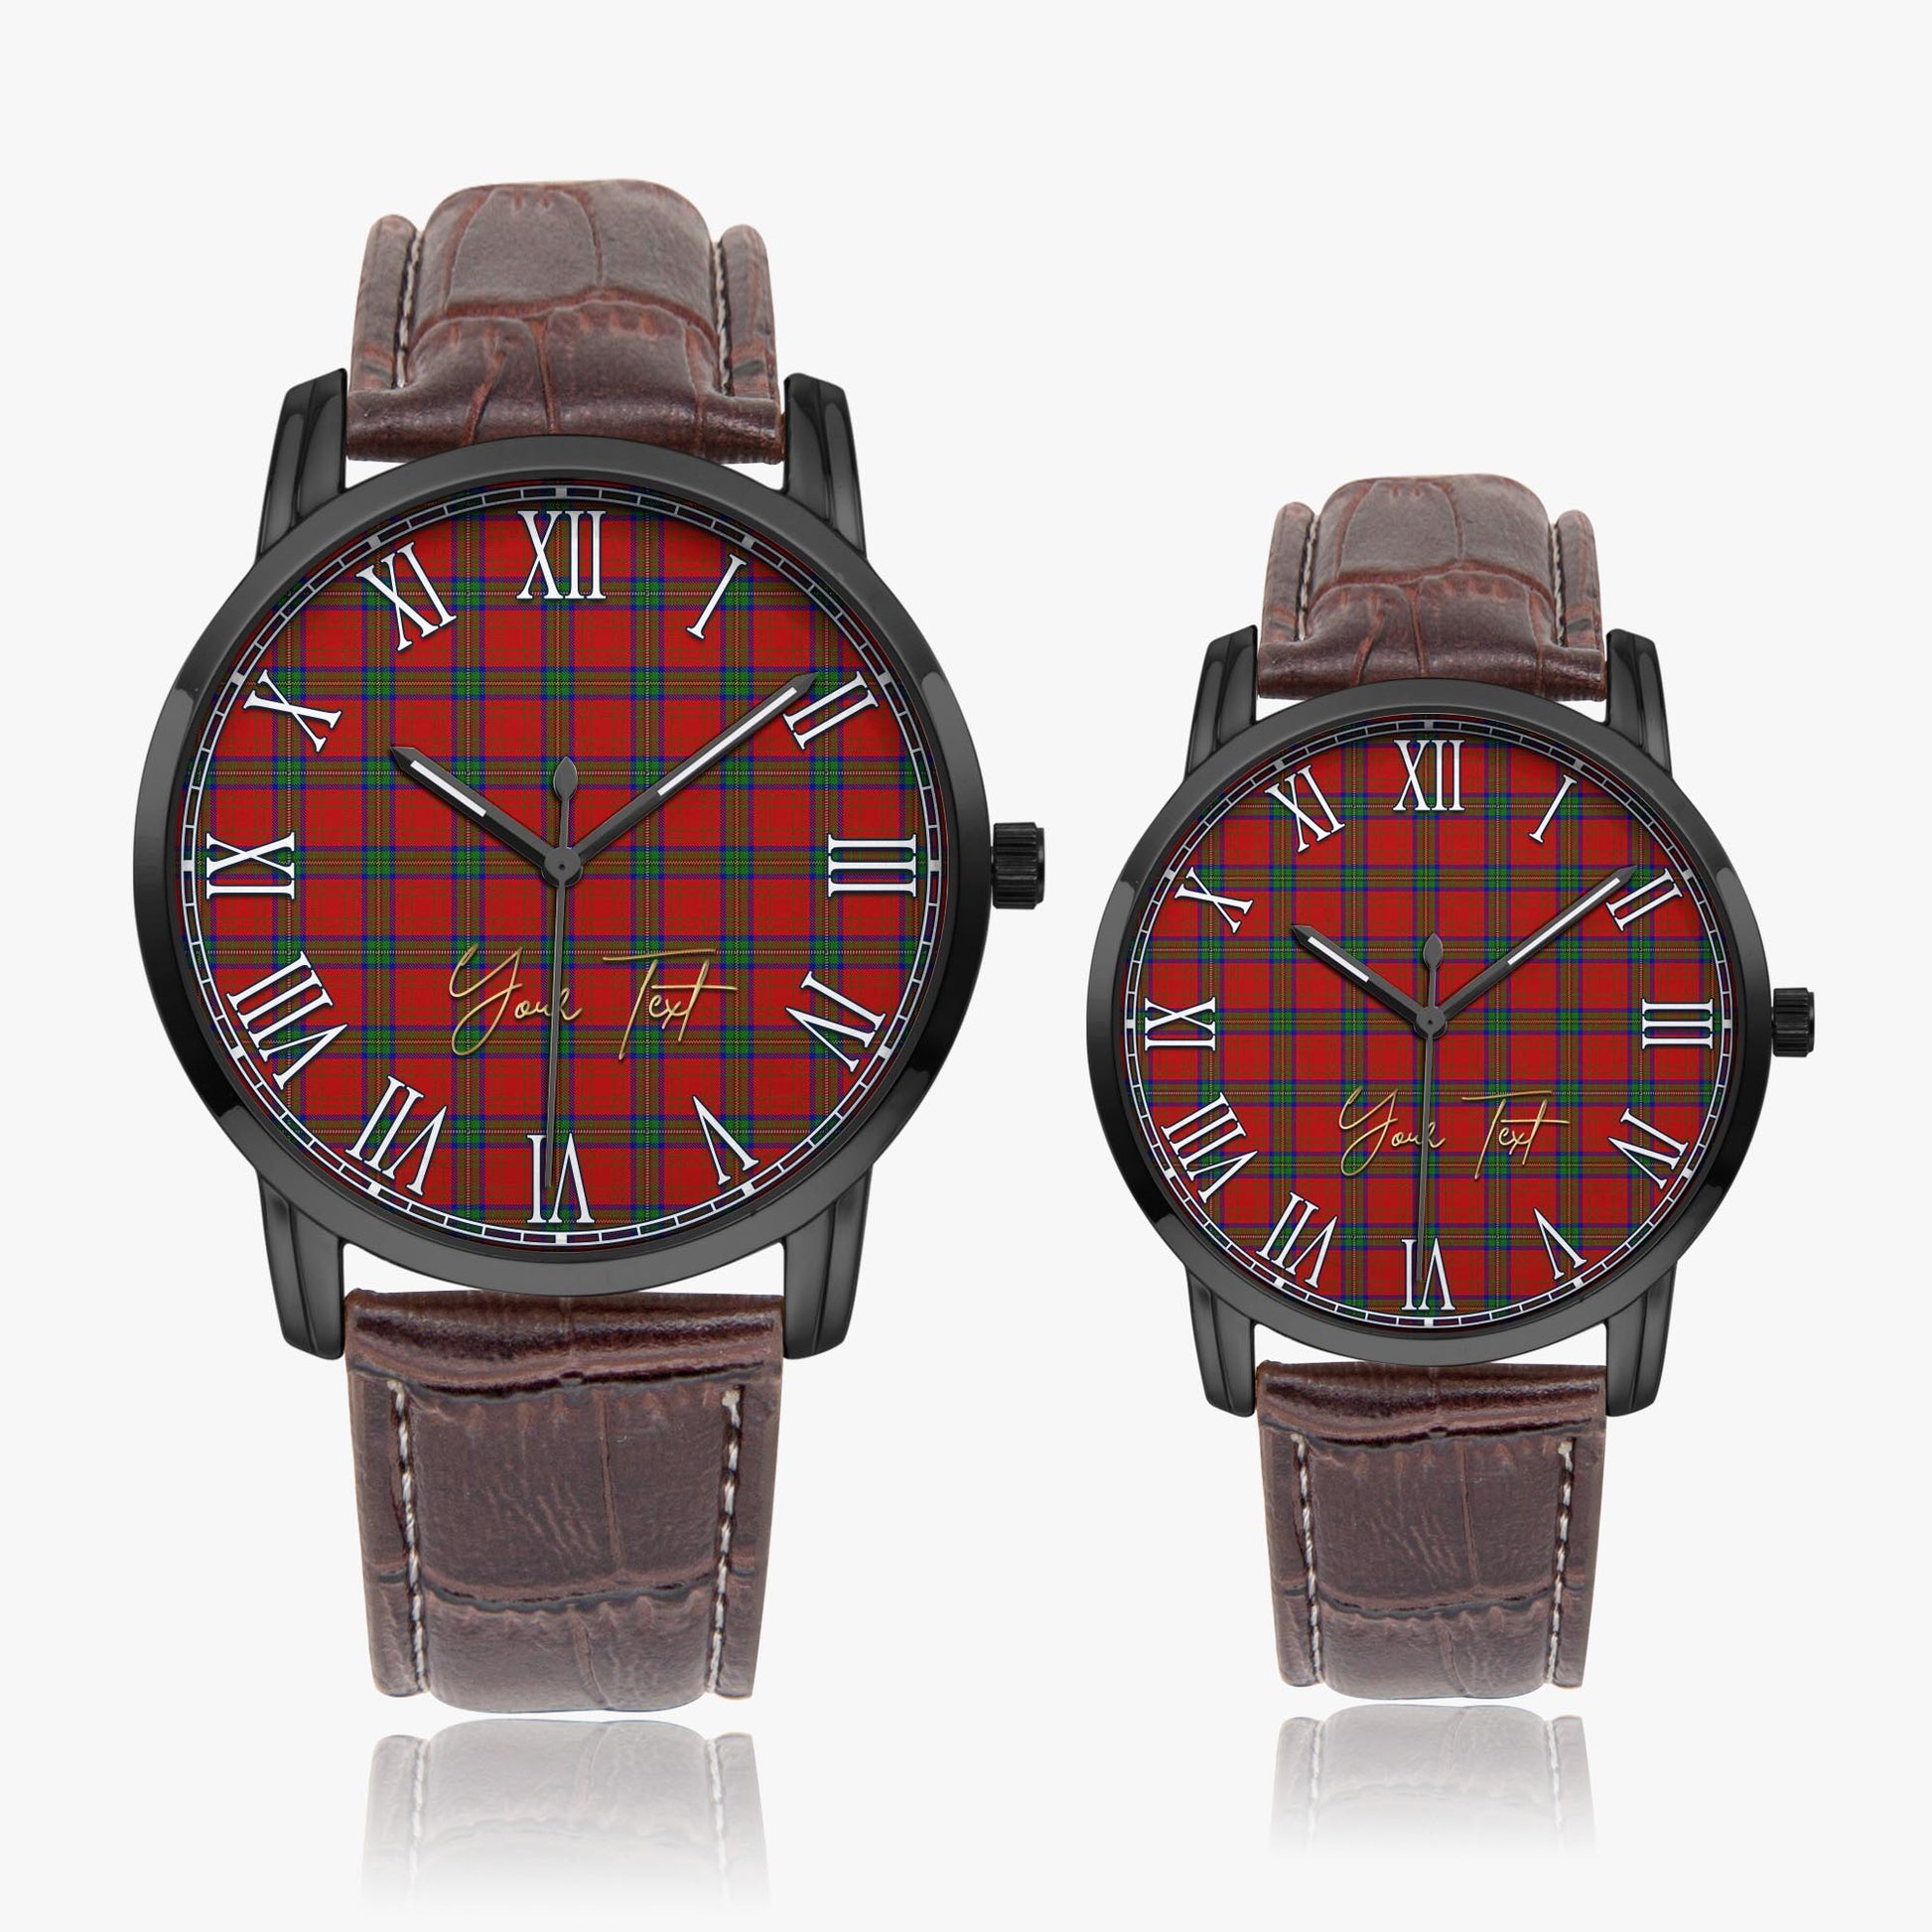 Wood Dress Tartan Personalized Your Text Leather Trap Quartz Watch Wide Type Black Case With Brown Leather Strap - Tartanvibesclothing Shop